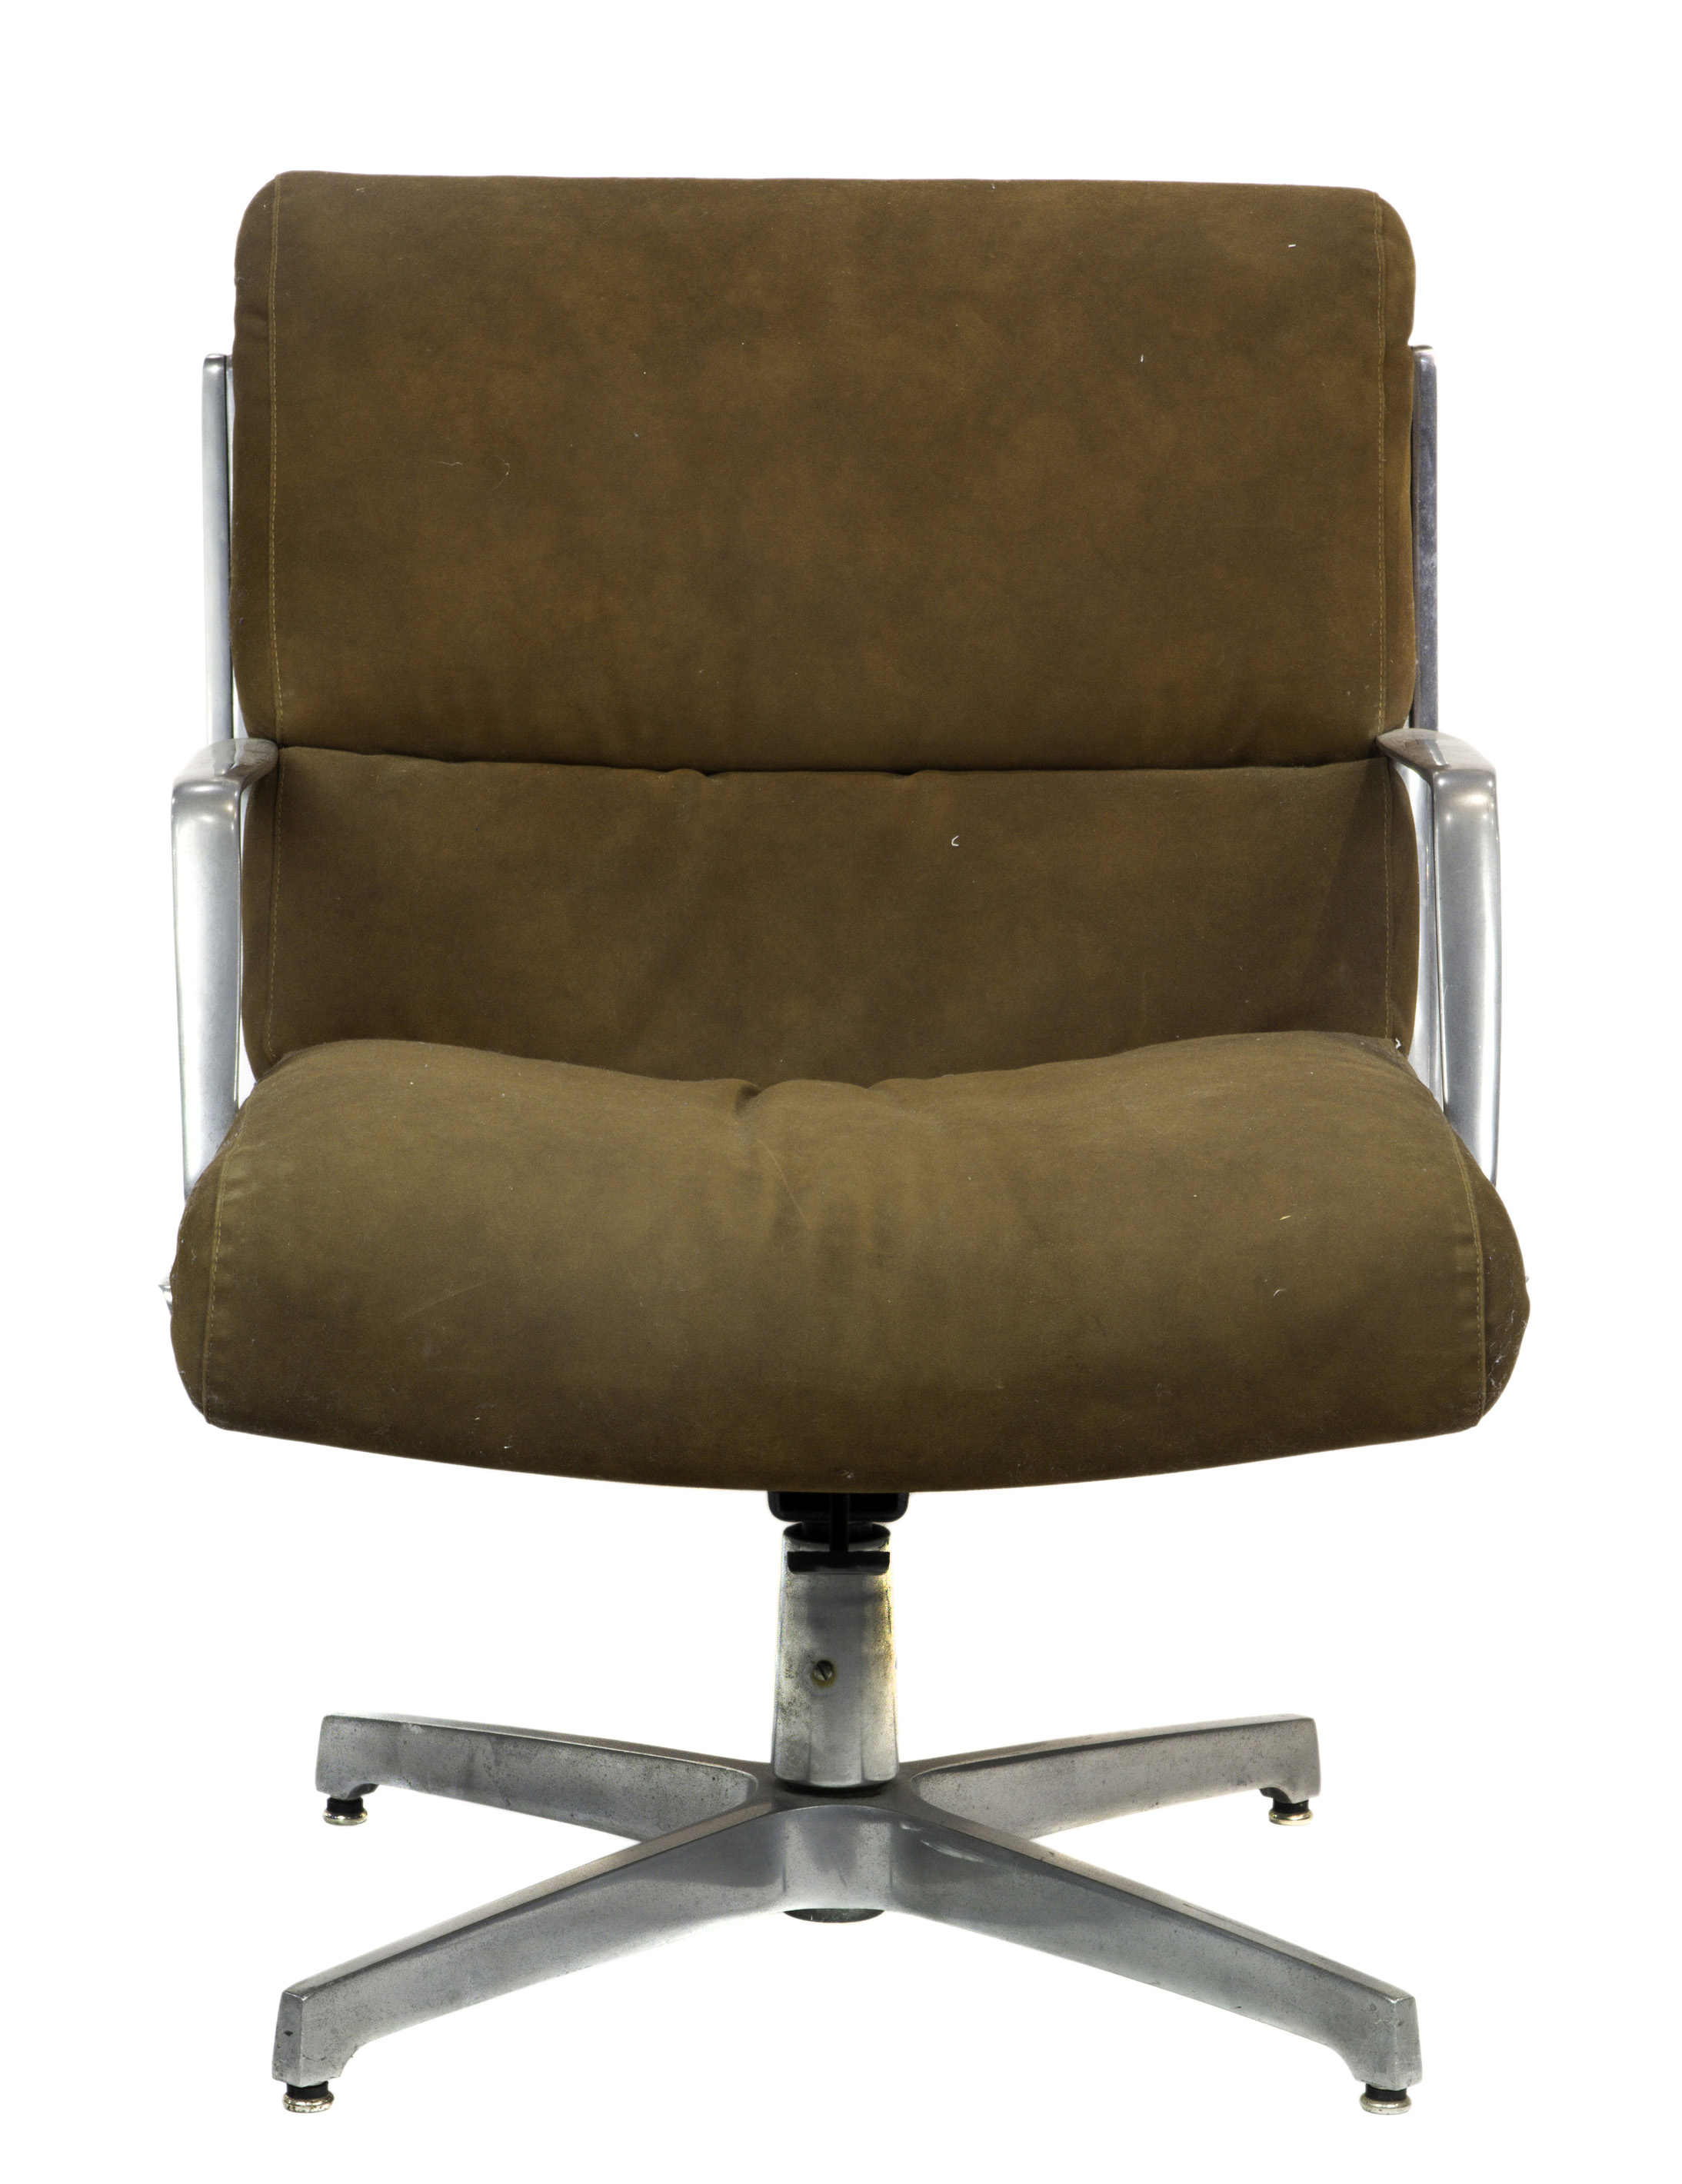 A KNOLL STYLE SUEDE EXECUTIVE CHAIR 3a4793